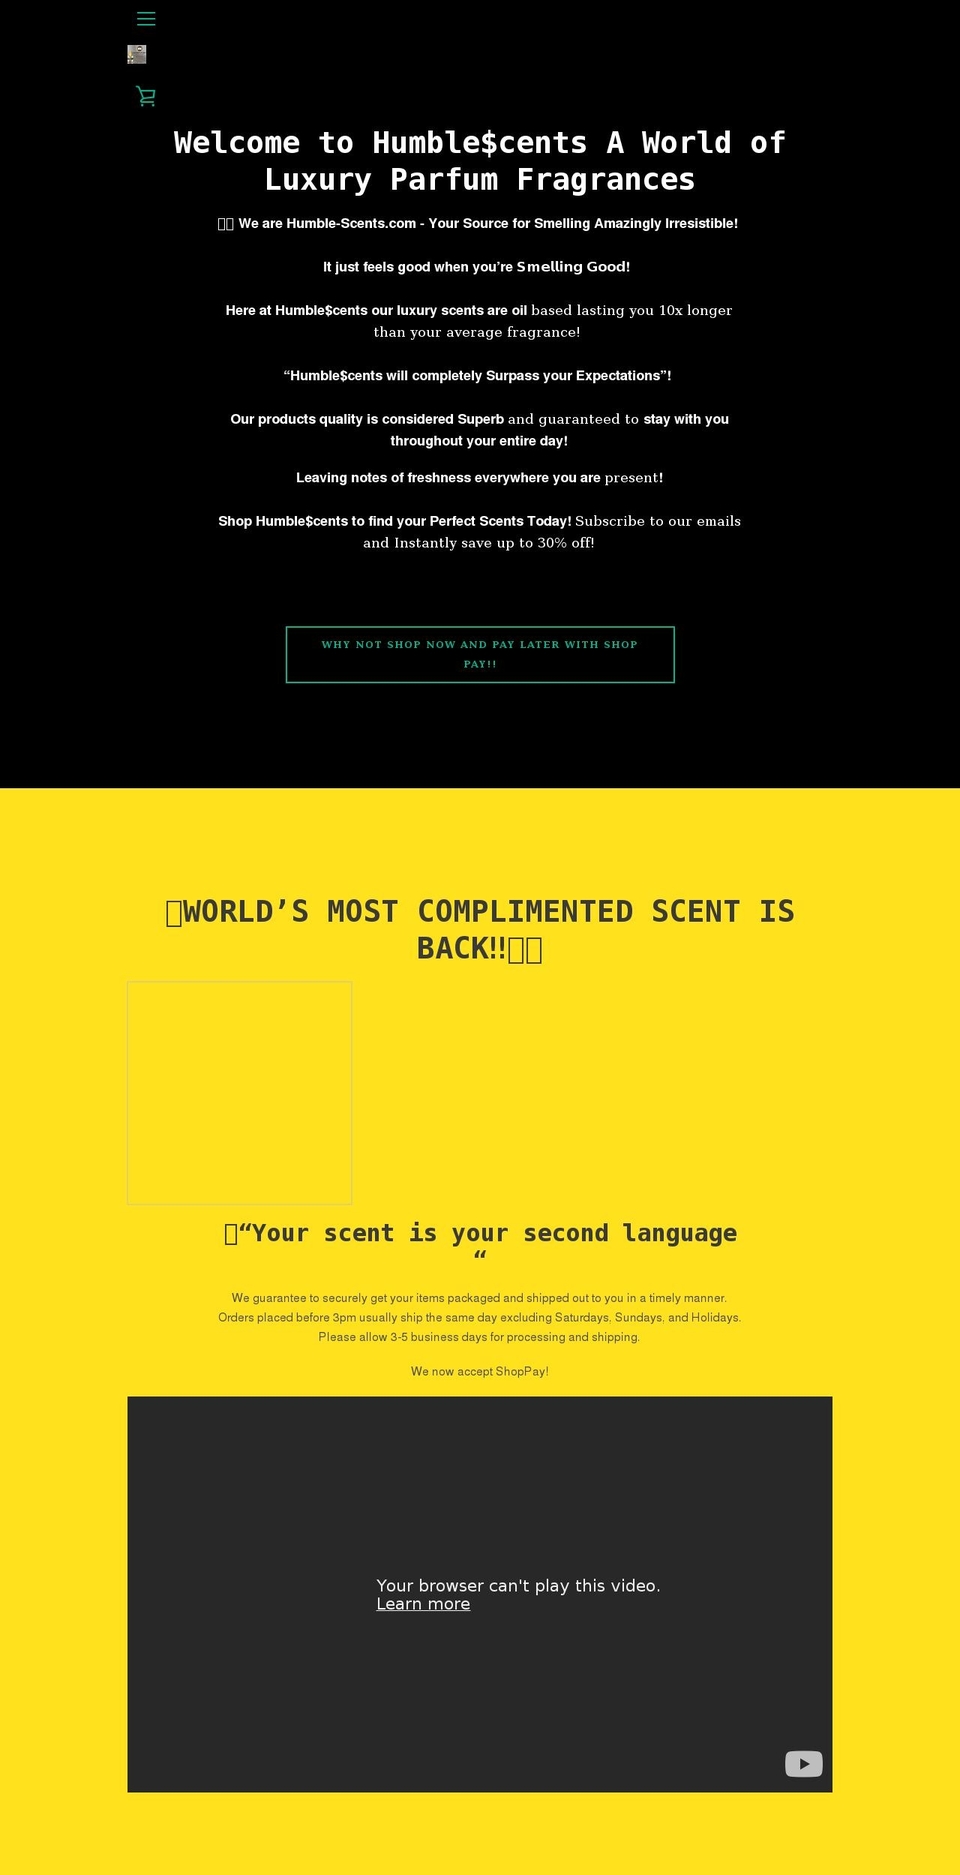 Narrative with Installments message Shopify theme site example humble-scents.com